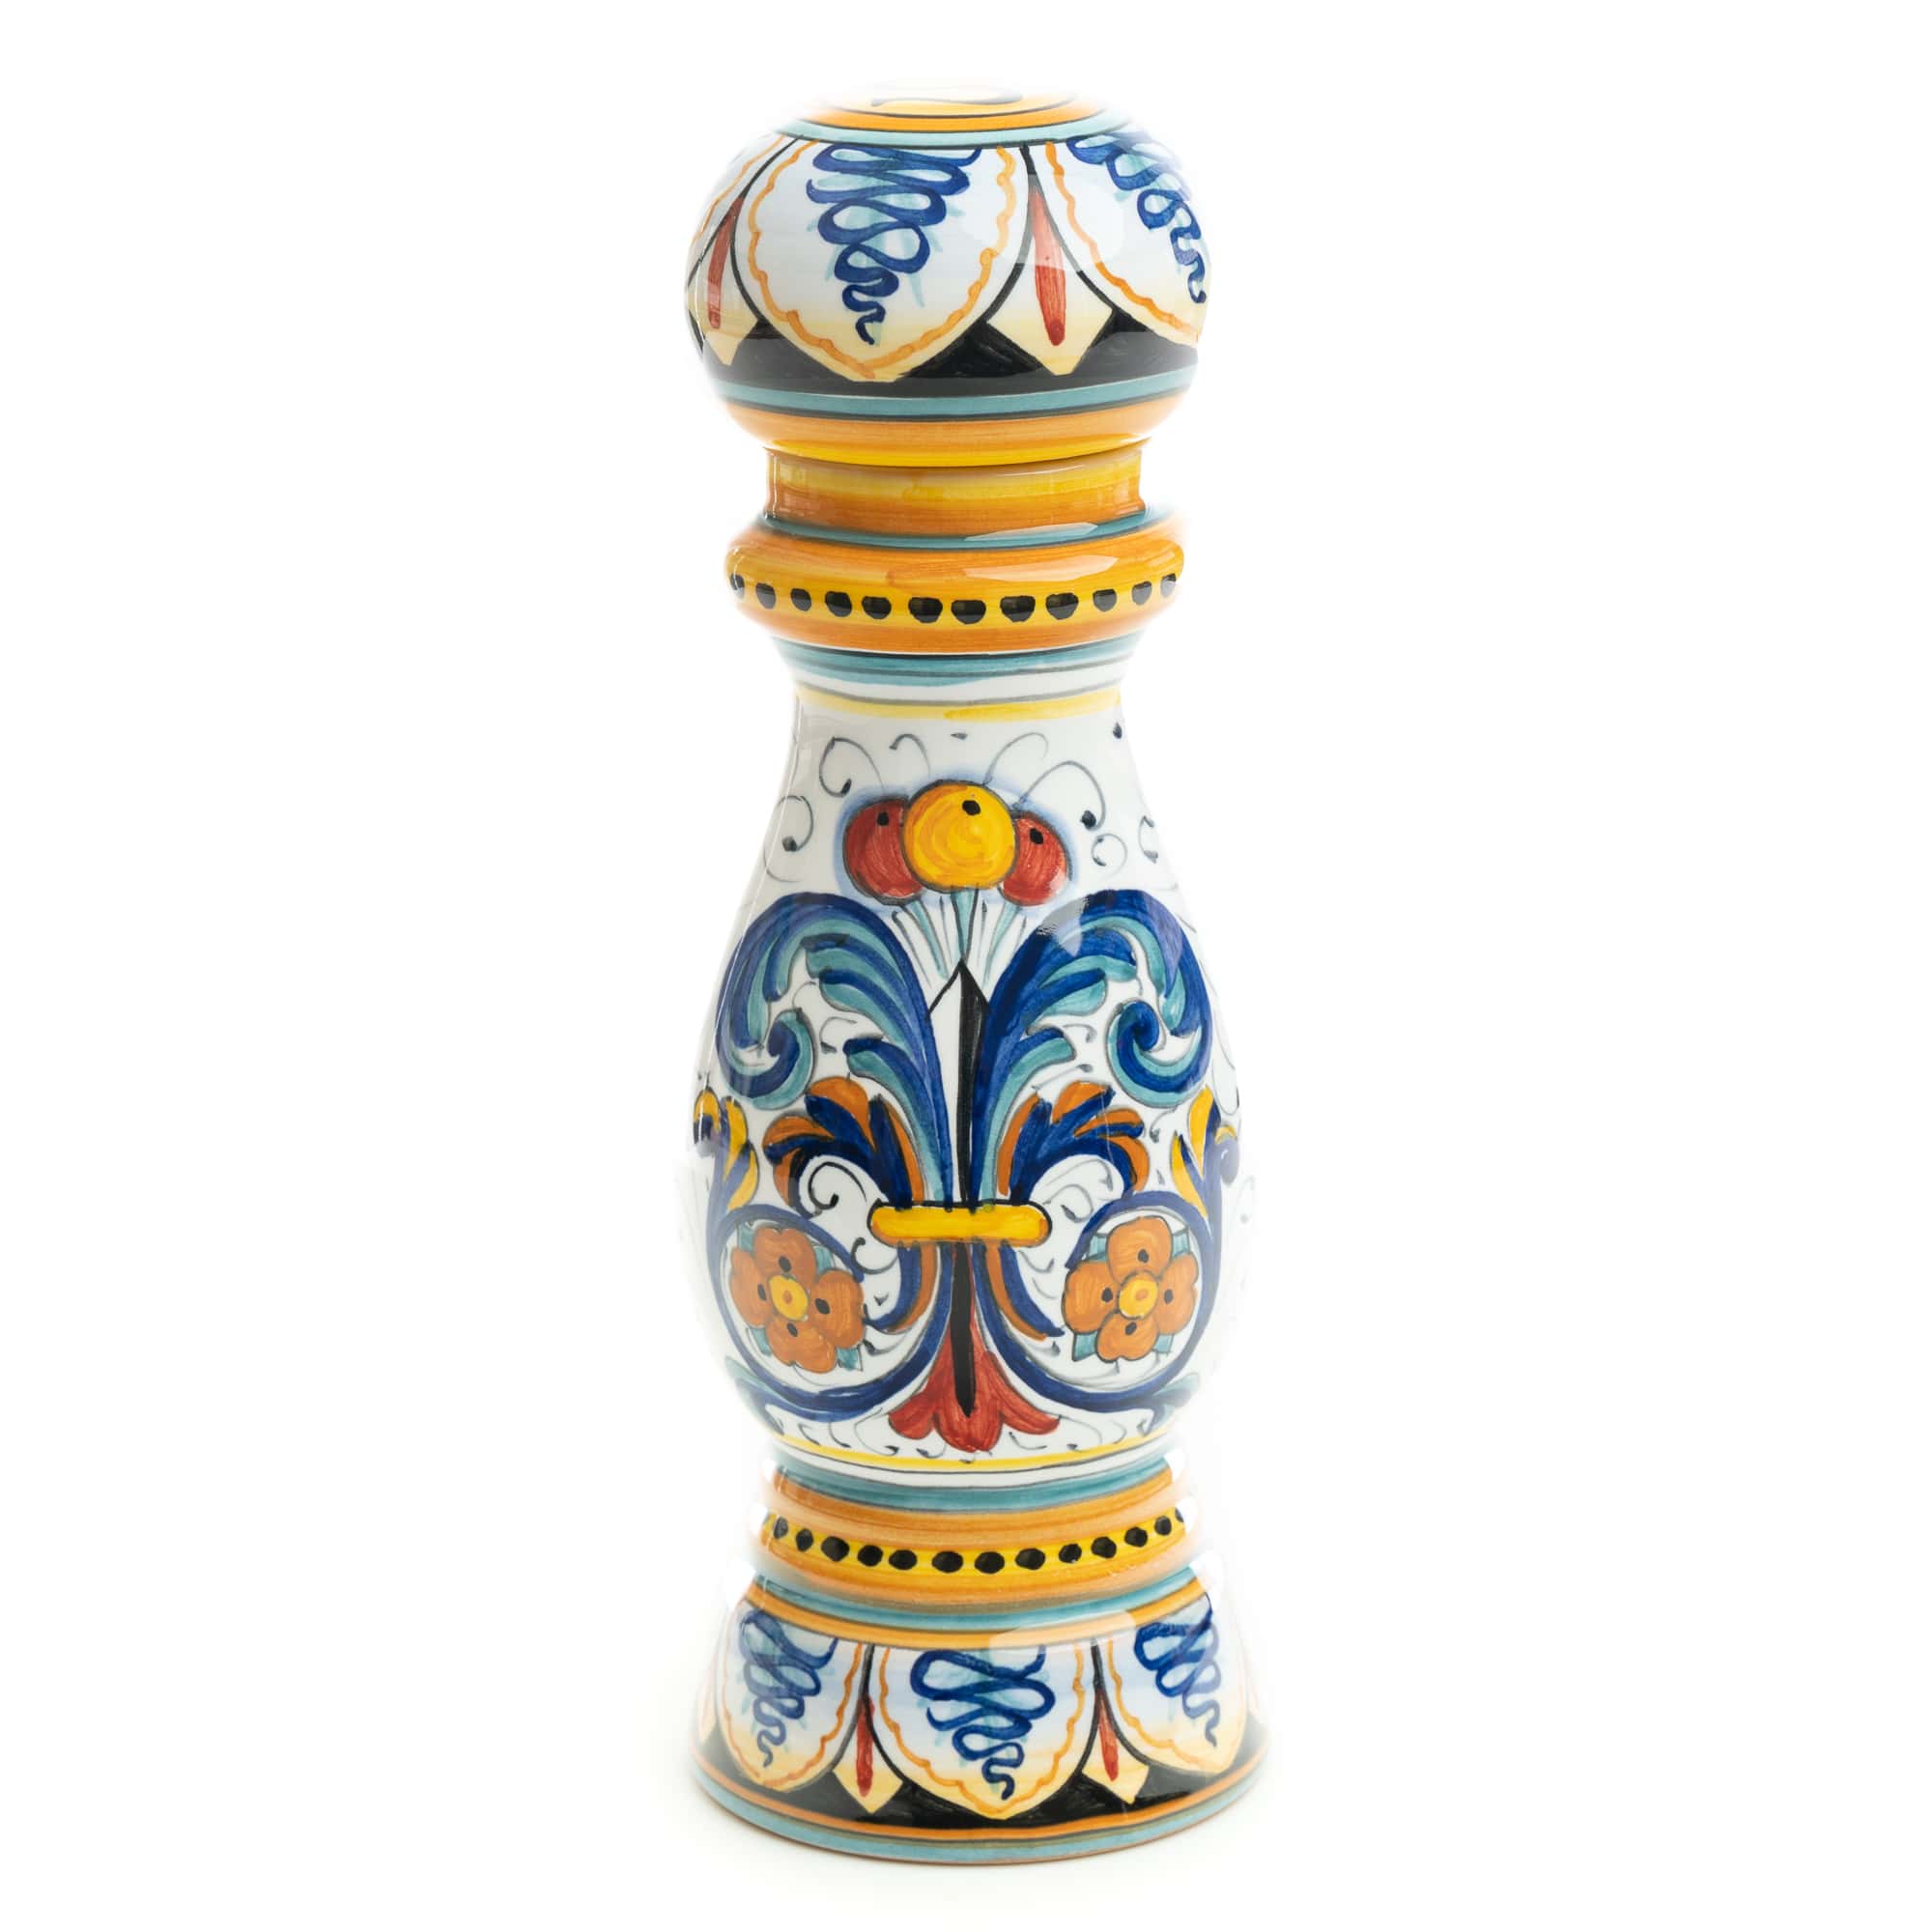 Ricco Deruta - Salt Grinder, ceramics, pottery, italian design, majolica, handmade, handcrafted, handpainted, home decor, kitchen art, home goods, deruta, majolica, Artisan, treasures, traditional art, modern art, gift ideas, style, SF, shop small business, artists, shop online, landmark store, legacy, one of a kind, limited edition, gift guide, gift shop, retail shop, decorations, shopping, italy, home staging, home decorating, home interiors